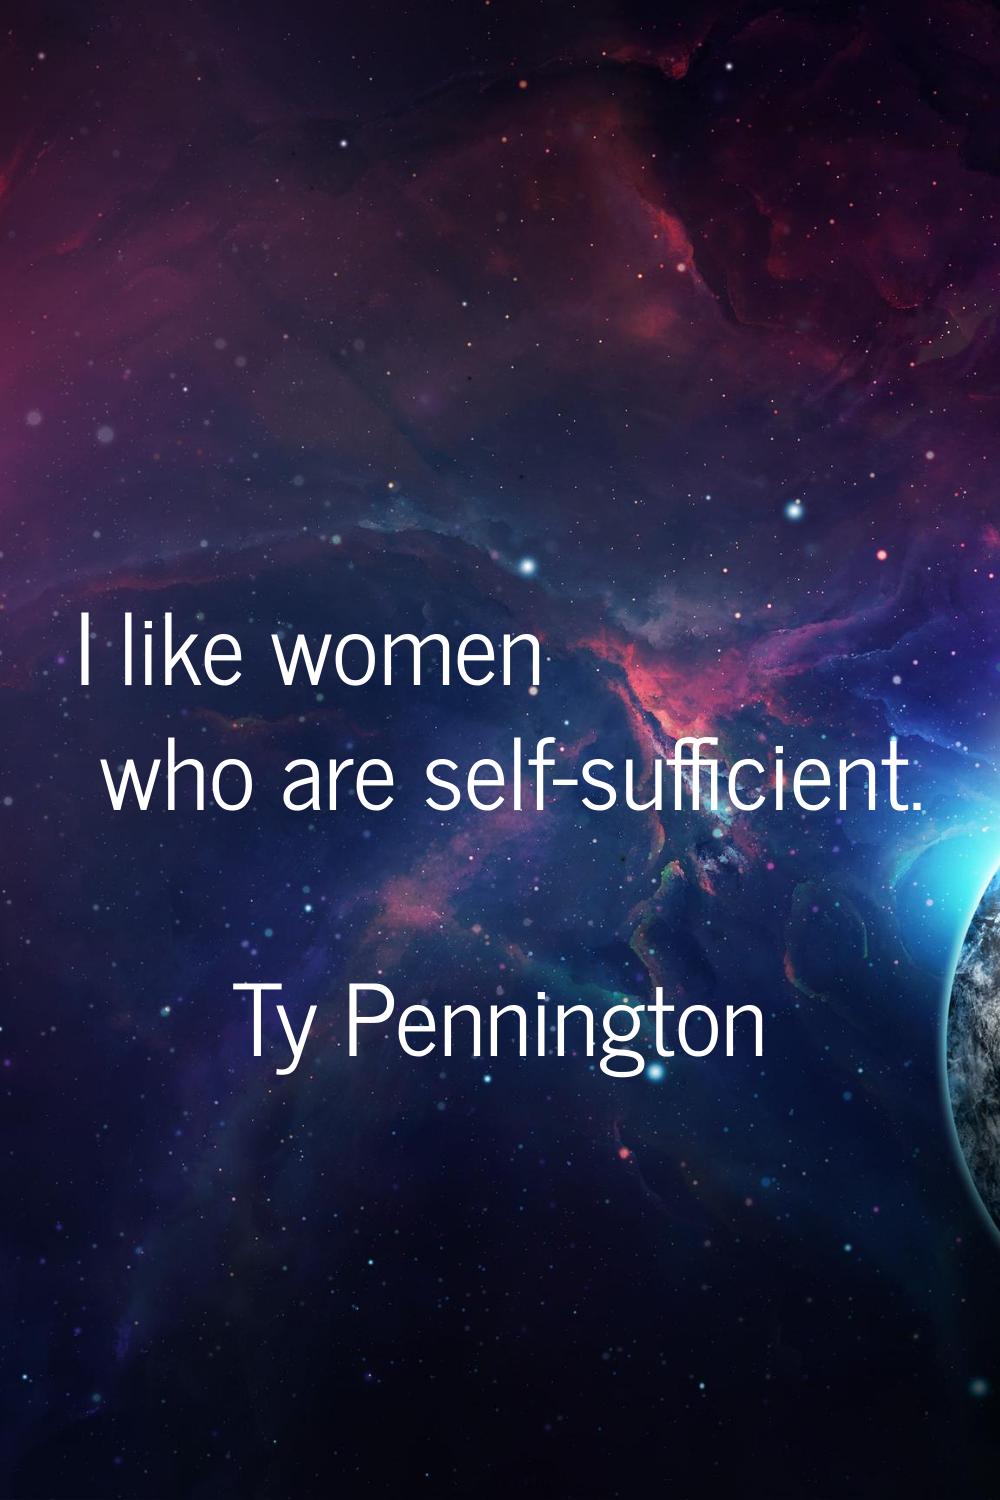 I like women who are self-sufficient.